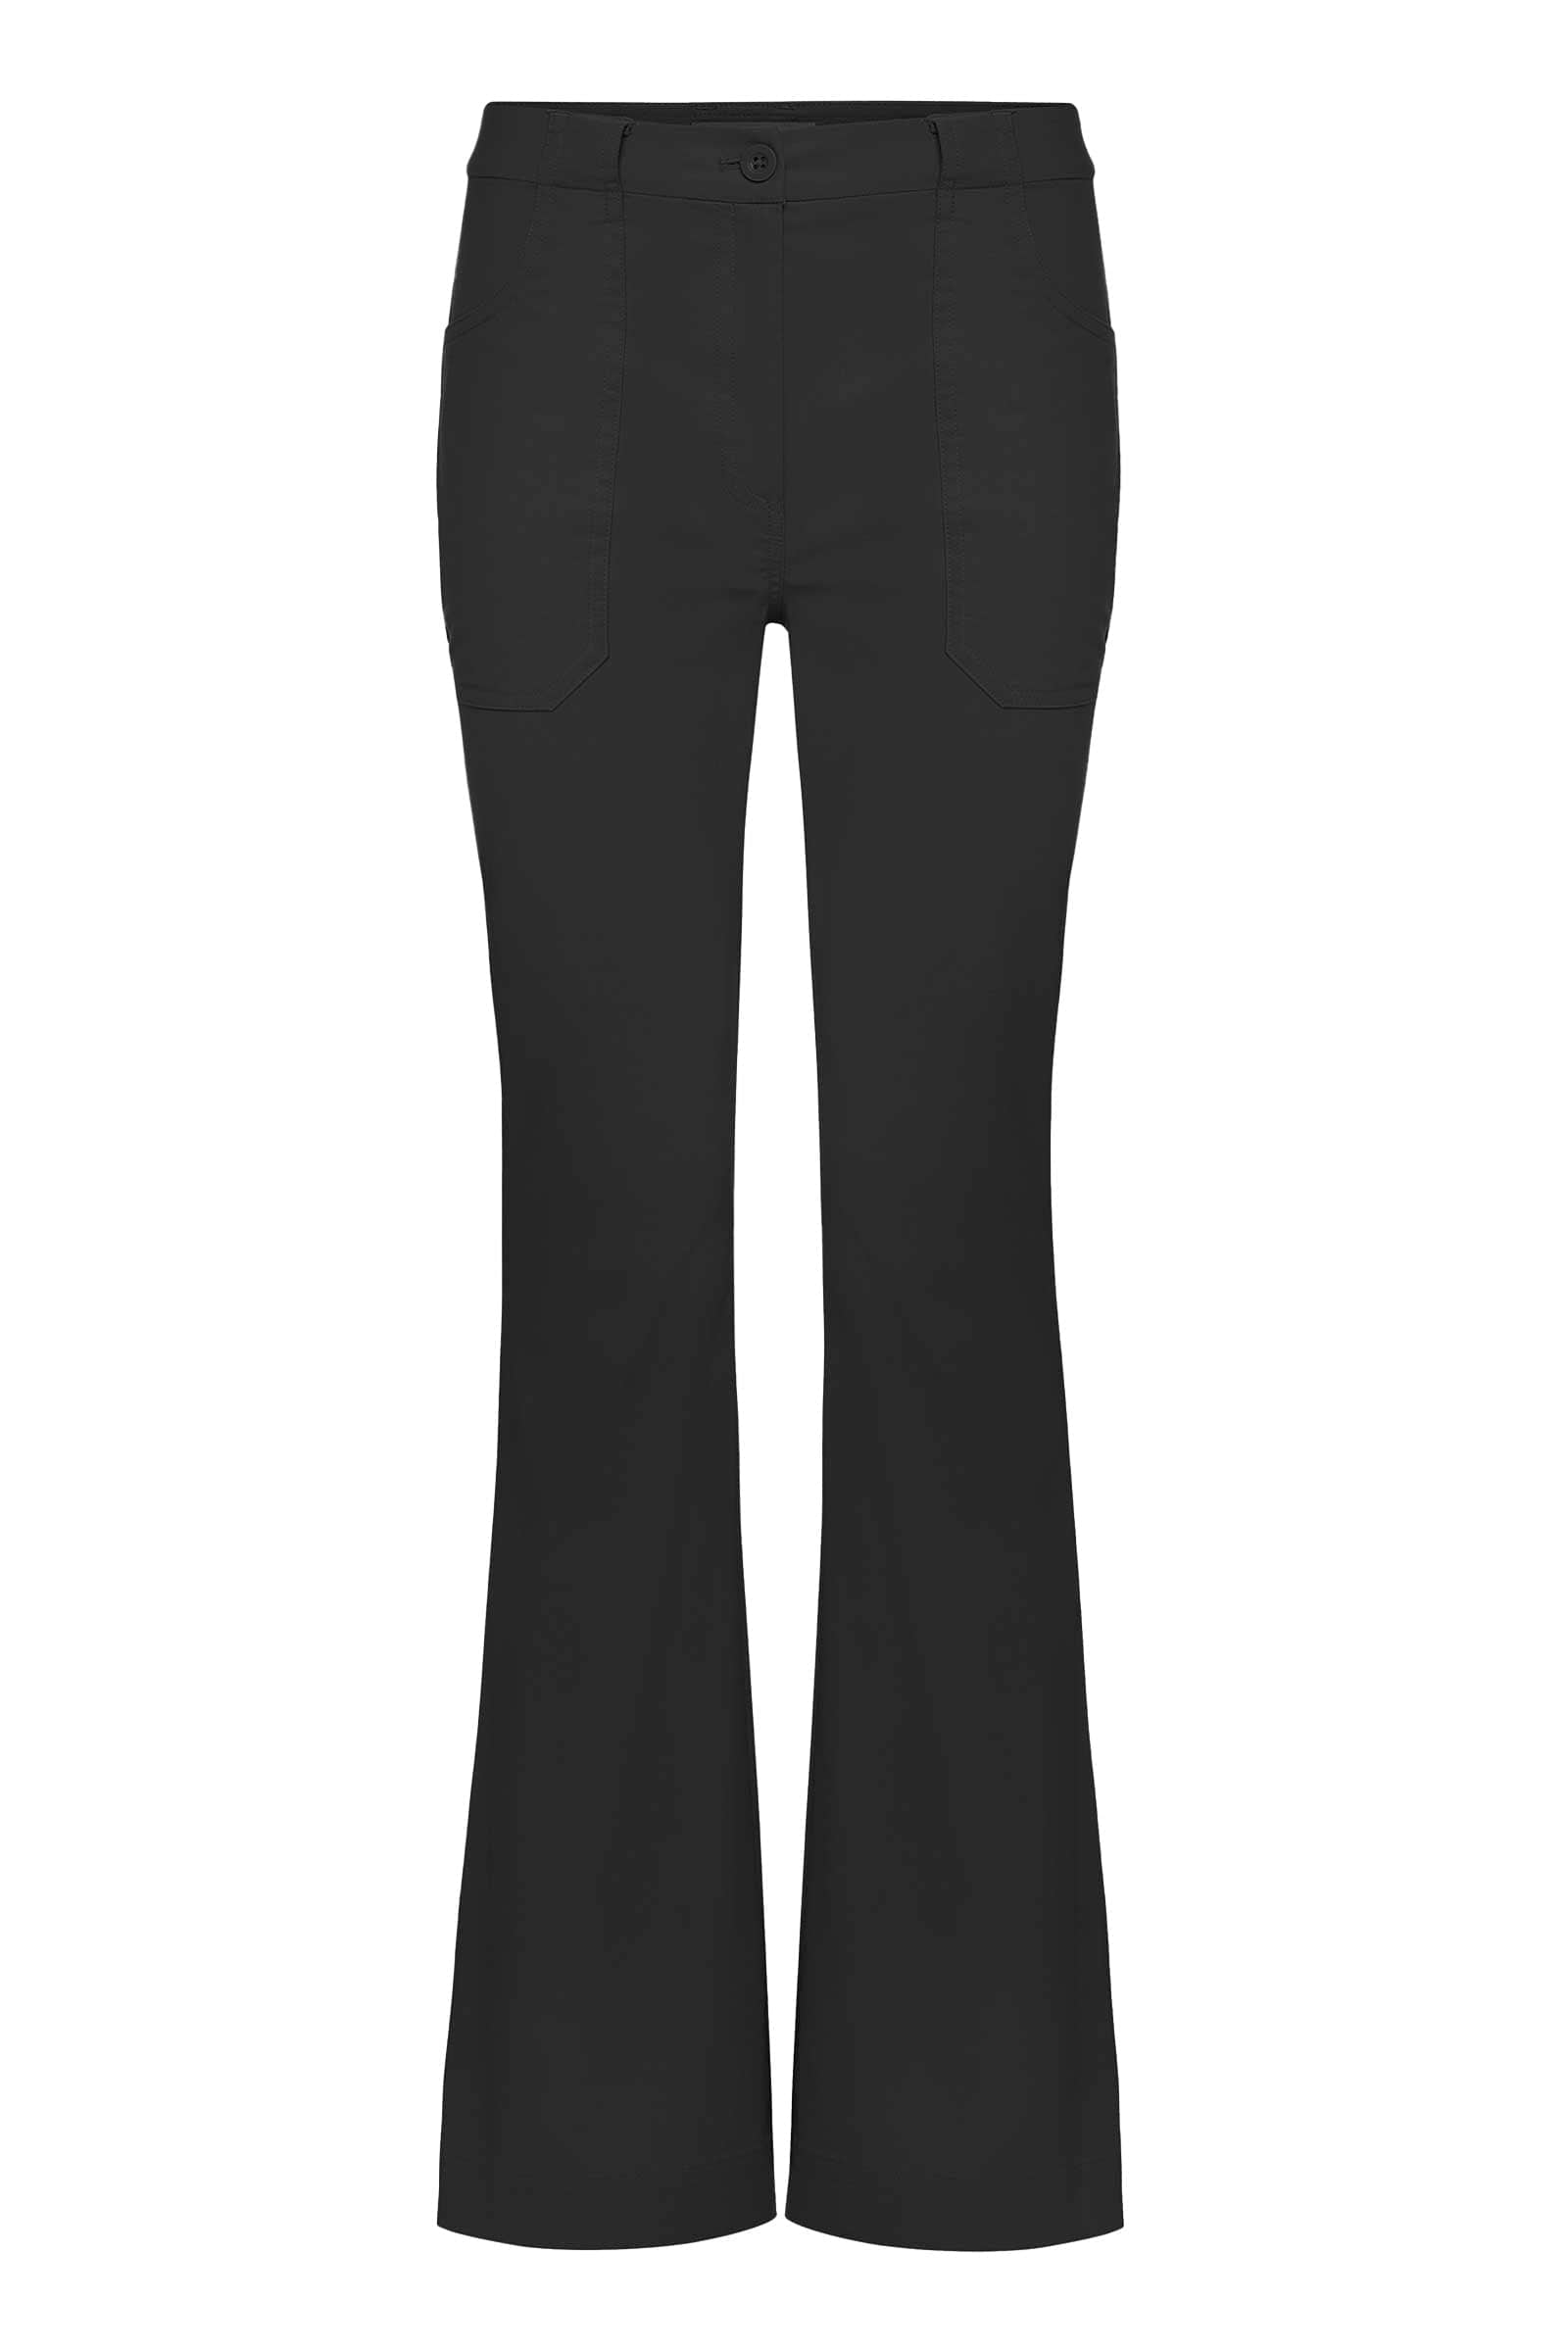 The Best Travel Pant. Flat Lay of a Darby Pant in Black.